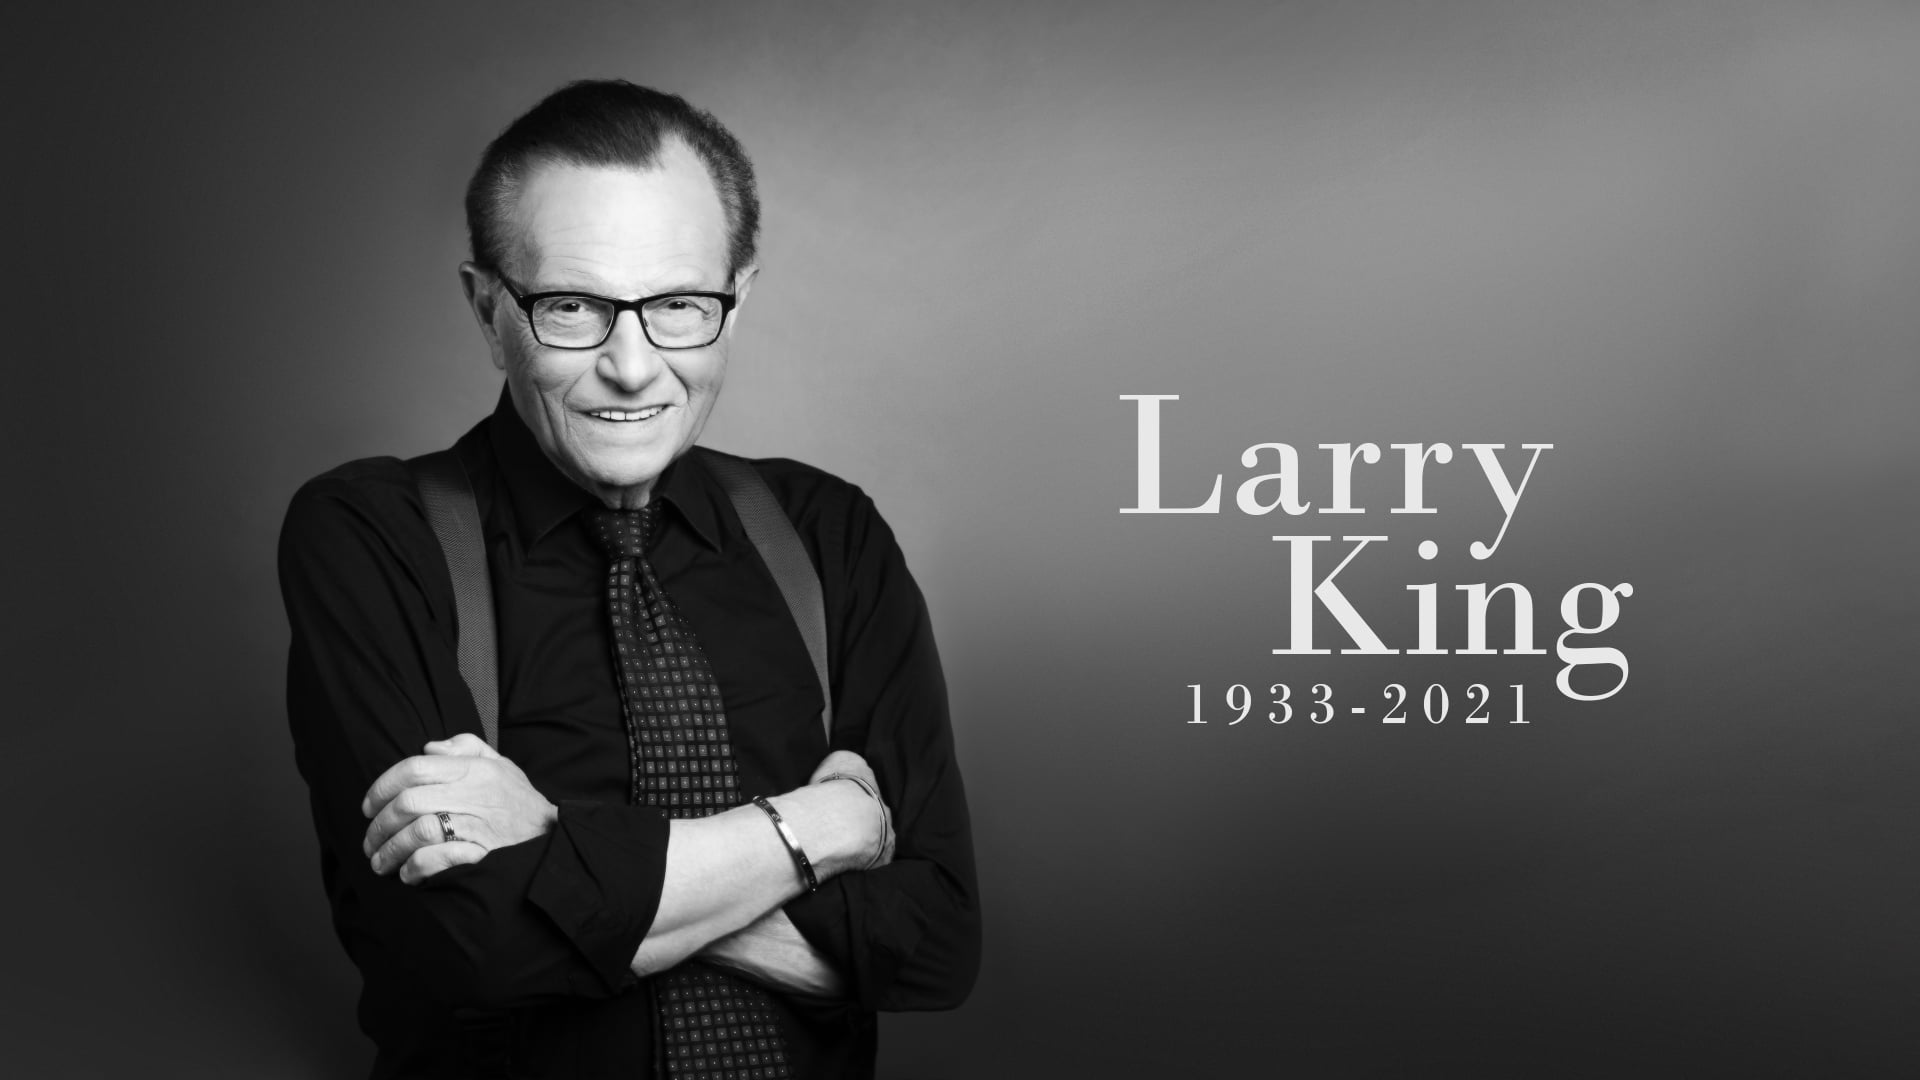 Iconic TV Host, Larry King Has Died at Age 87